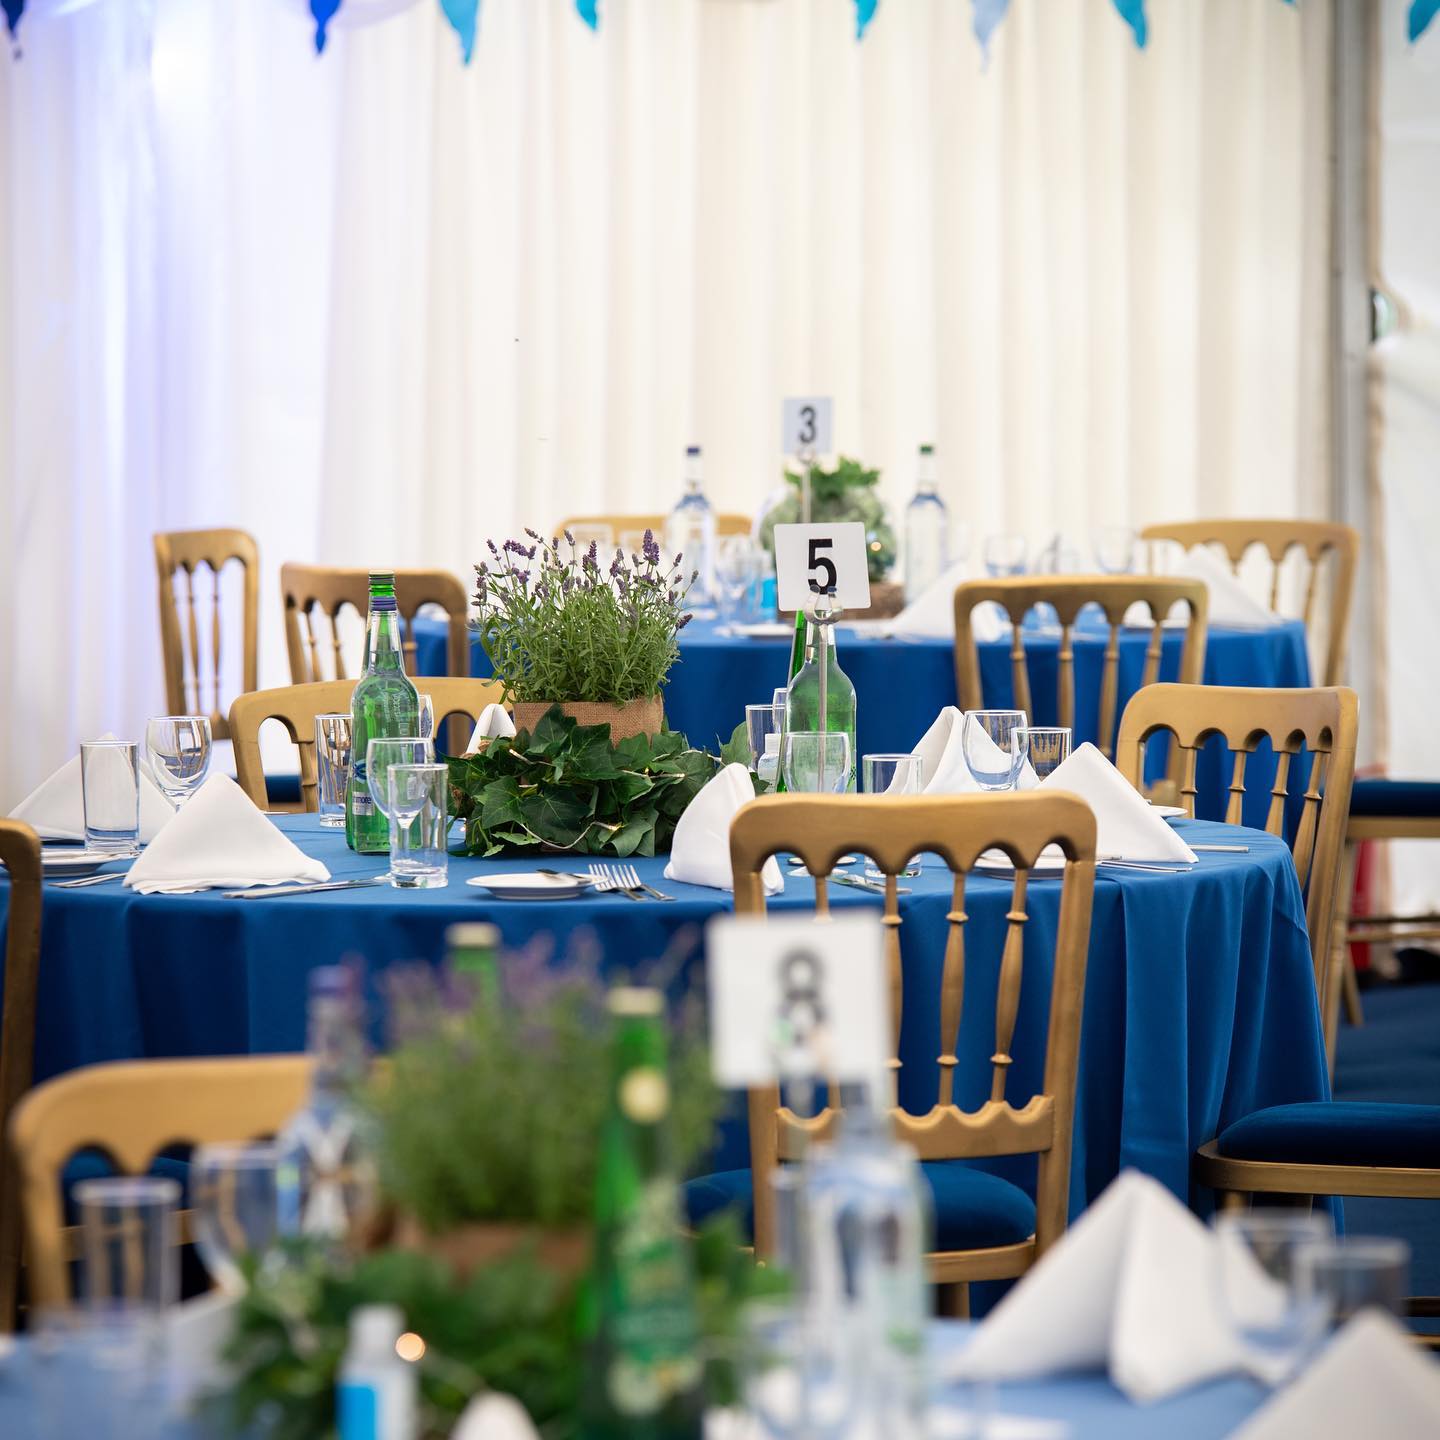 School Leavers Marquee Celebration, tables with blue linens and plants